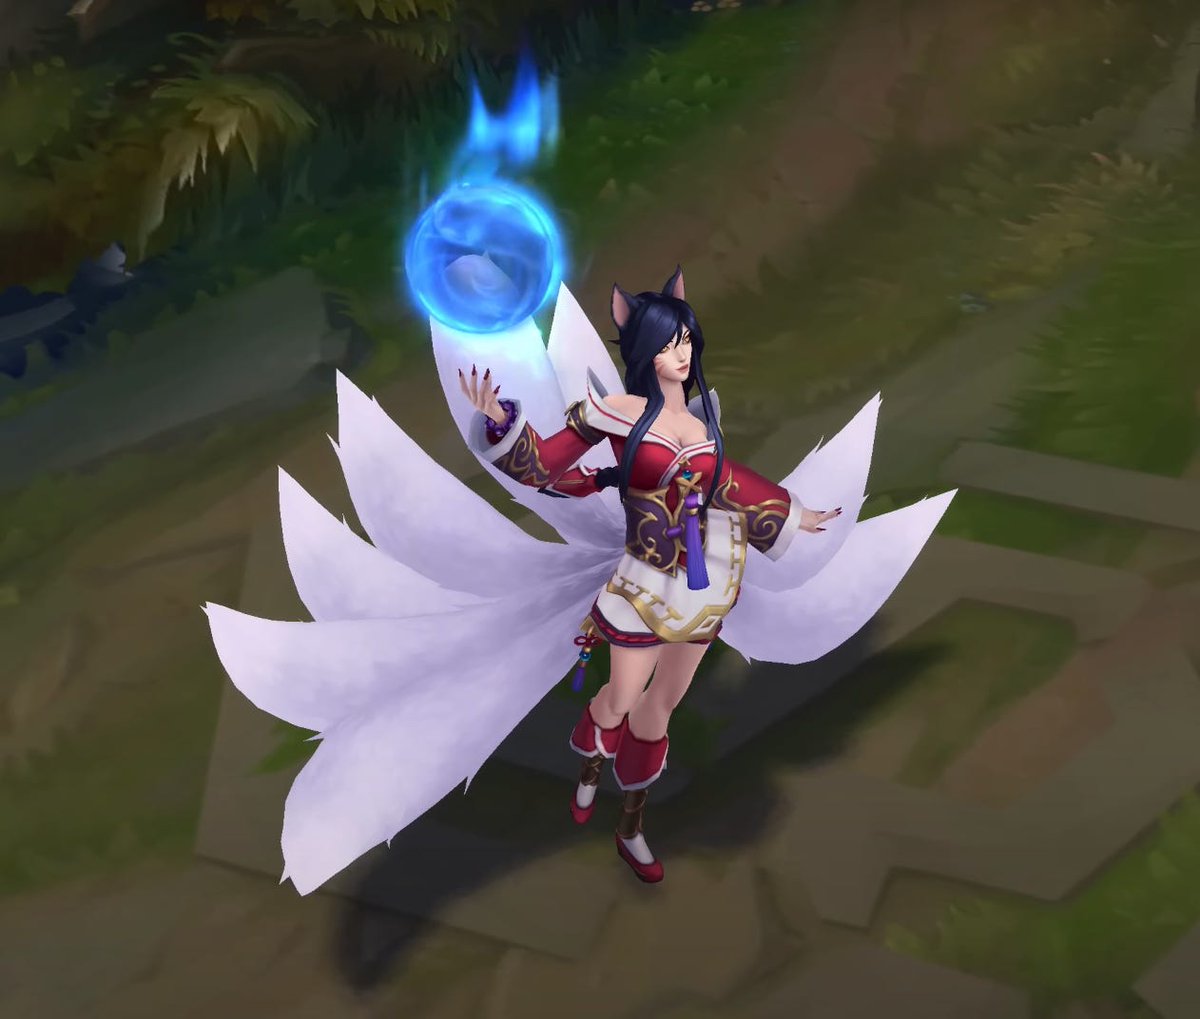 Dont spend $500. Use the real Faker Ahri Skin instead